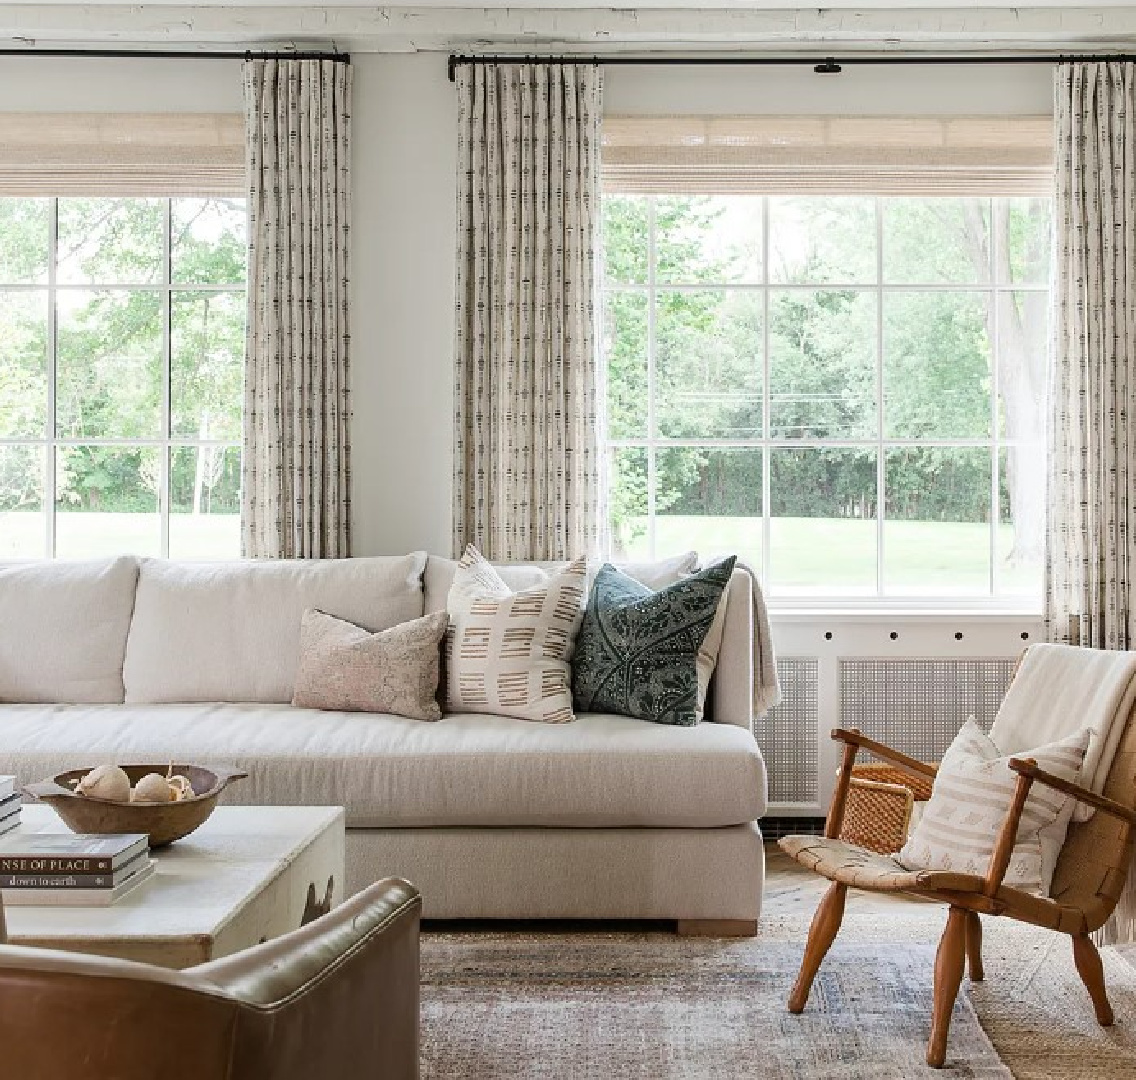 Kate Marker's 1920 white stucco Barrington Hills, IL Home (160 N. Buckley Rd) with modern, serene, unfussy, timeless interiors. #katemarkerinteriors @thedawnmckennagroup #katemarkerhome